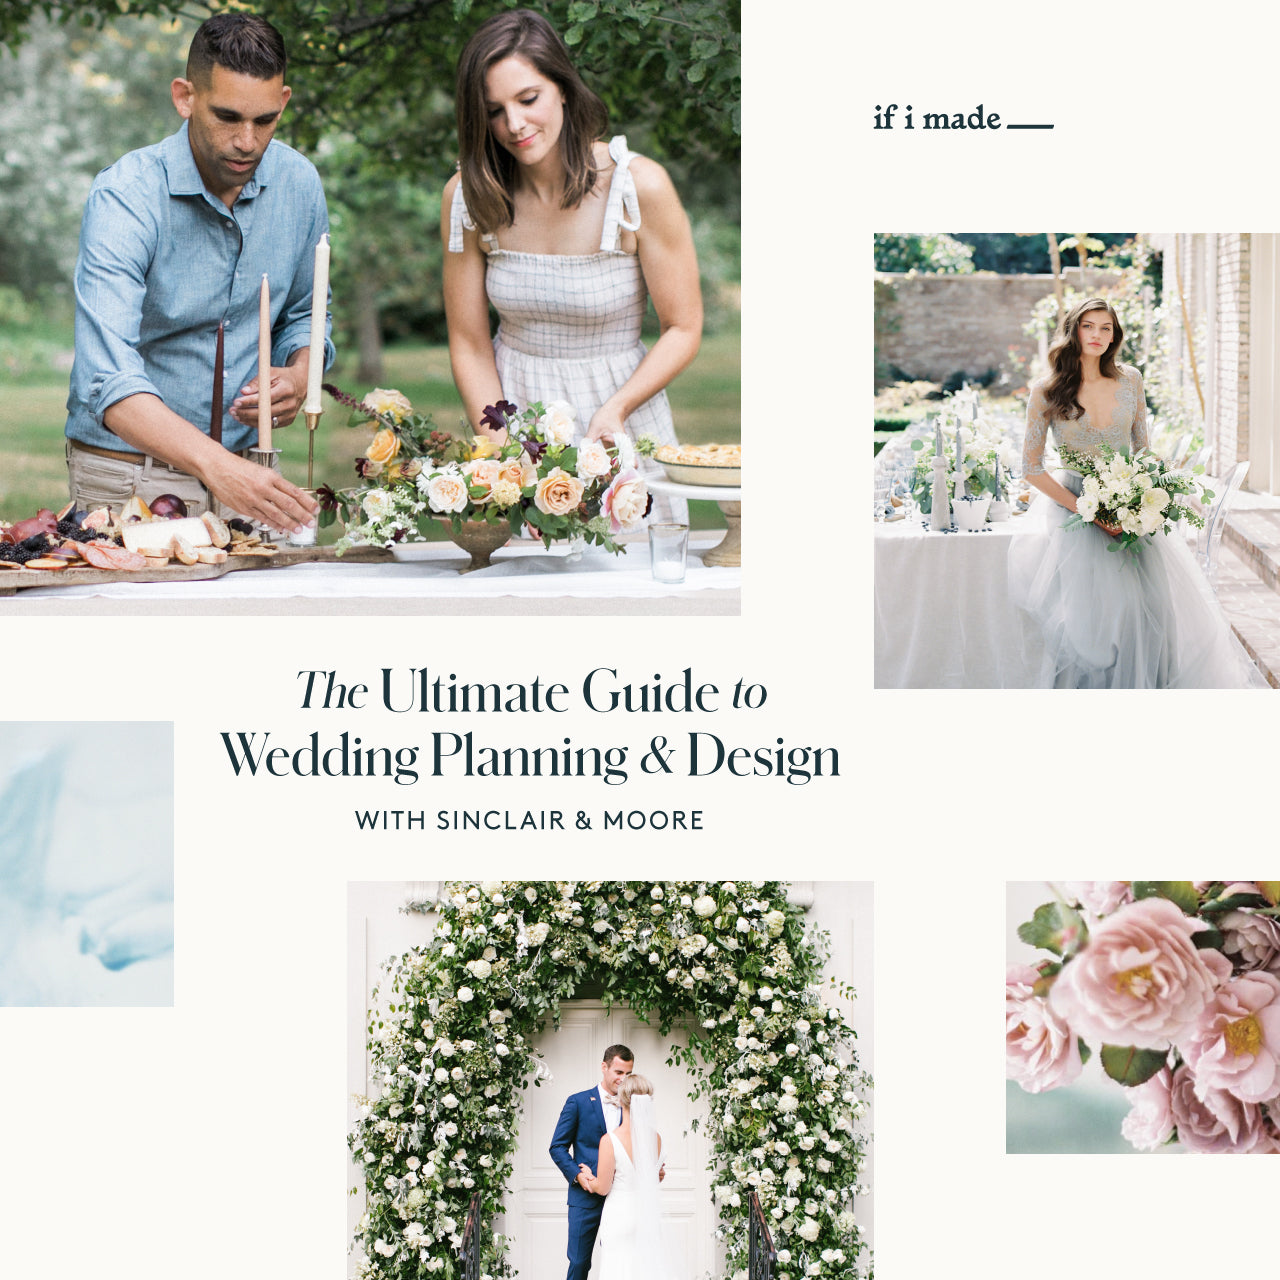 The Ultimate Guide to Wedding Planning & Design with Sinclair & Moore (ESPP1020) - 26 payments of $69